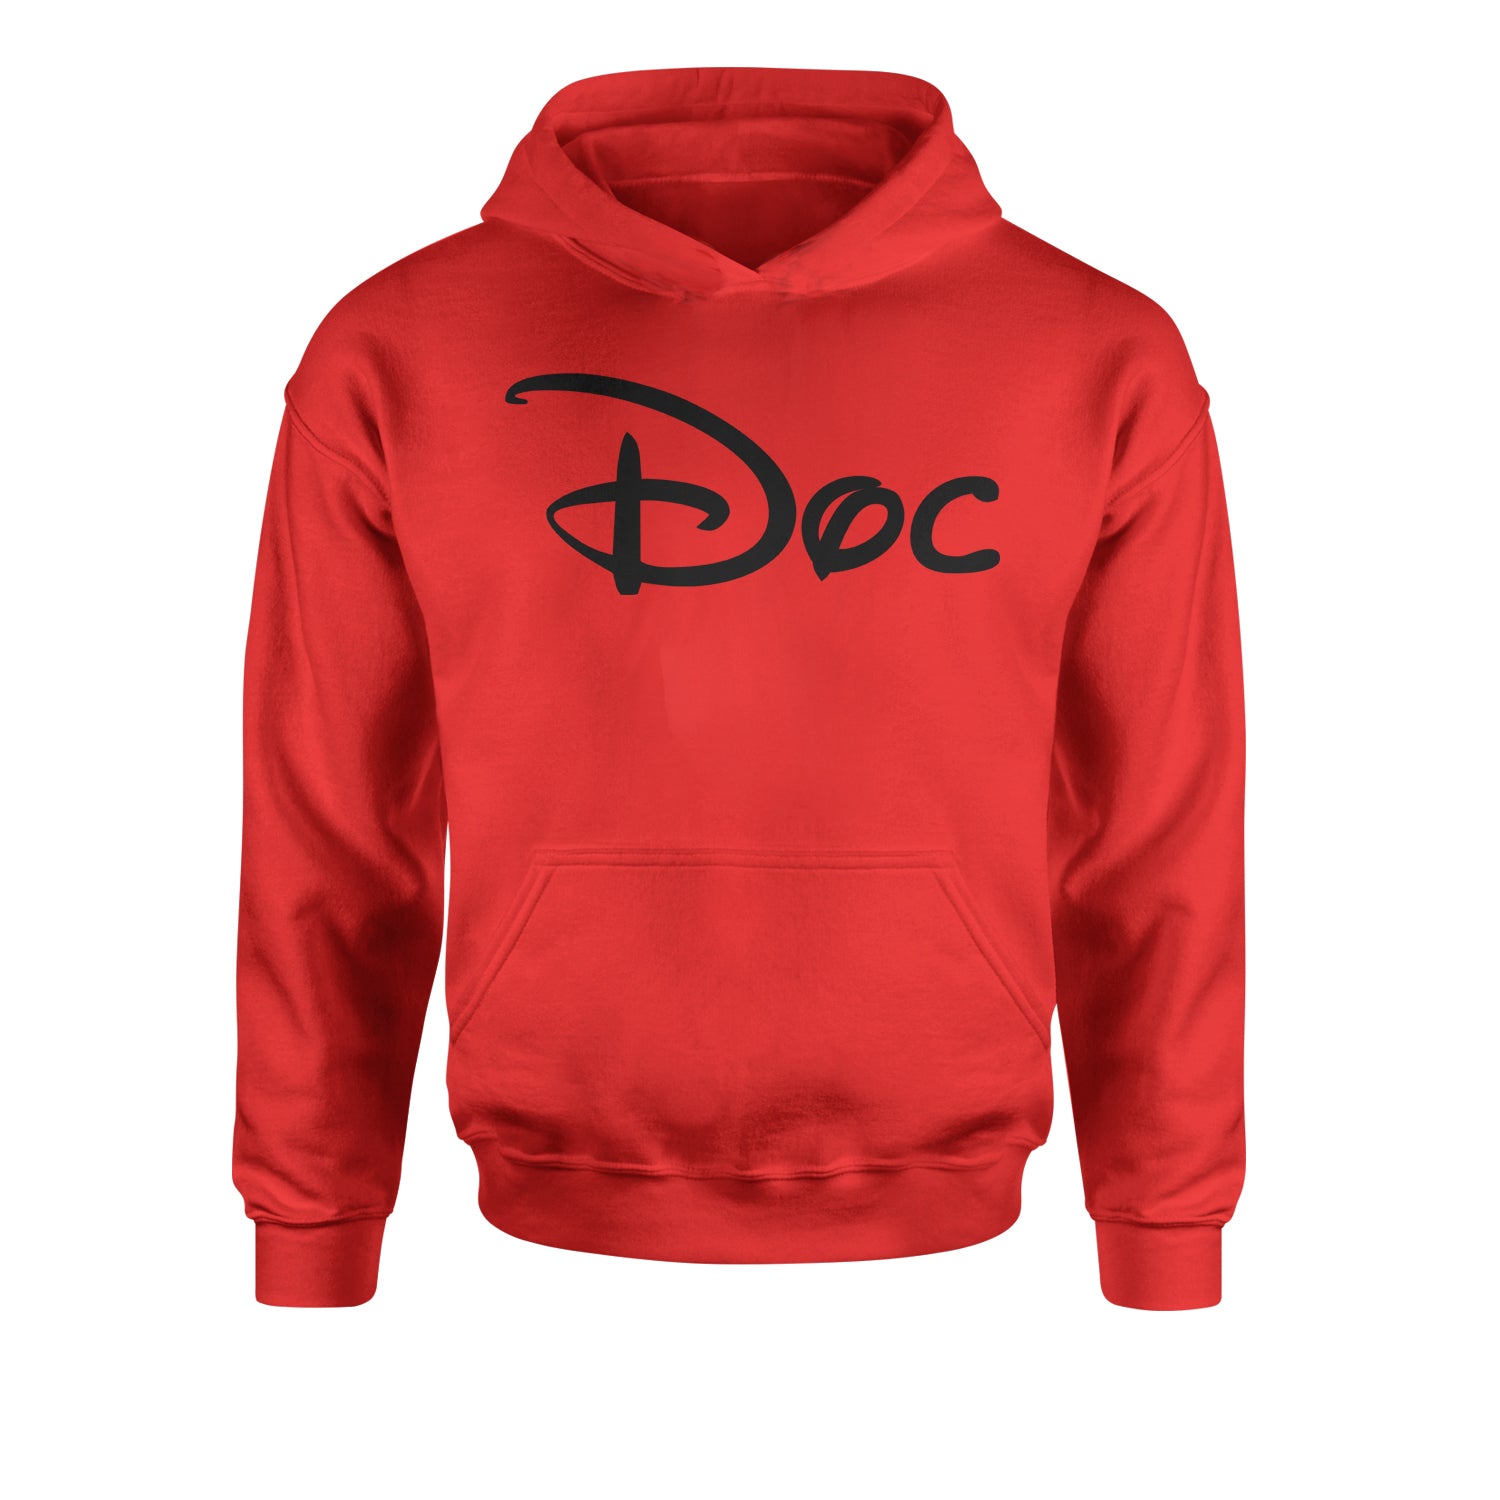 Doc - 7 Dwarfs Costume Youth-Sized Hoodie and, costume, dwarfs, group, halloween, matching, seven, snow, the, white by Expression Tees